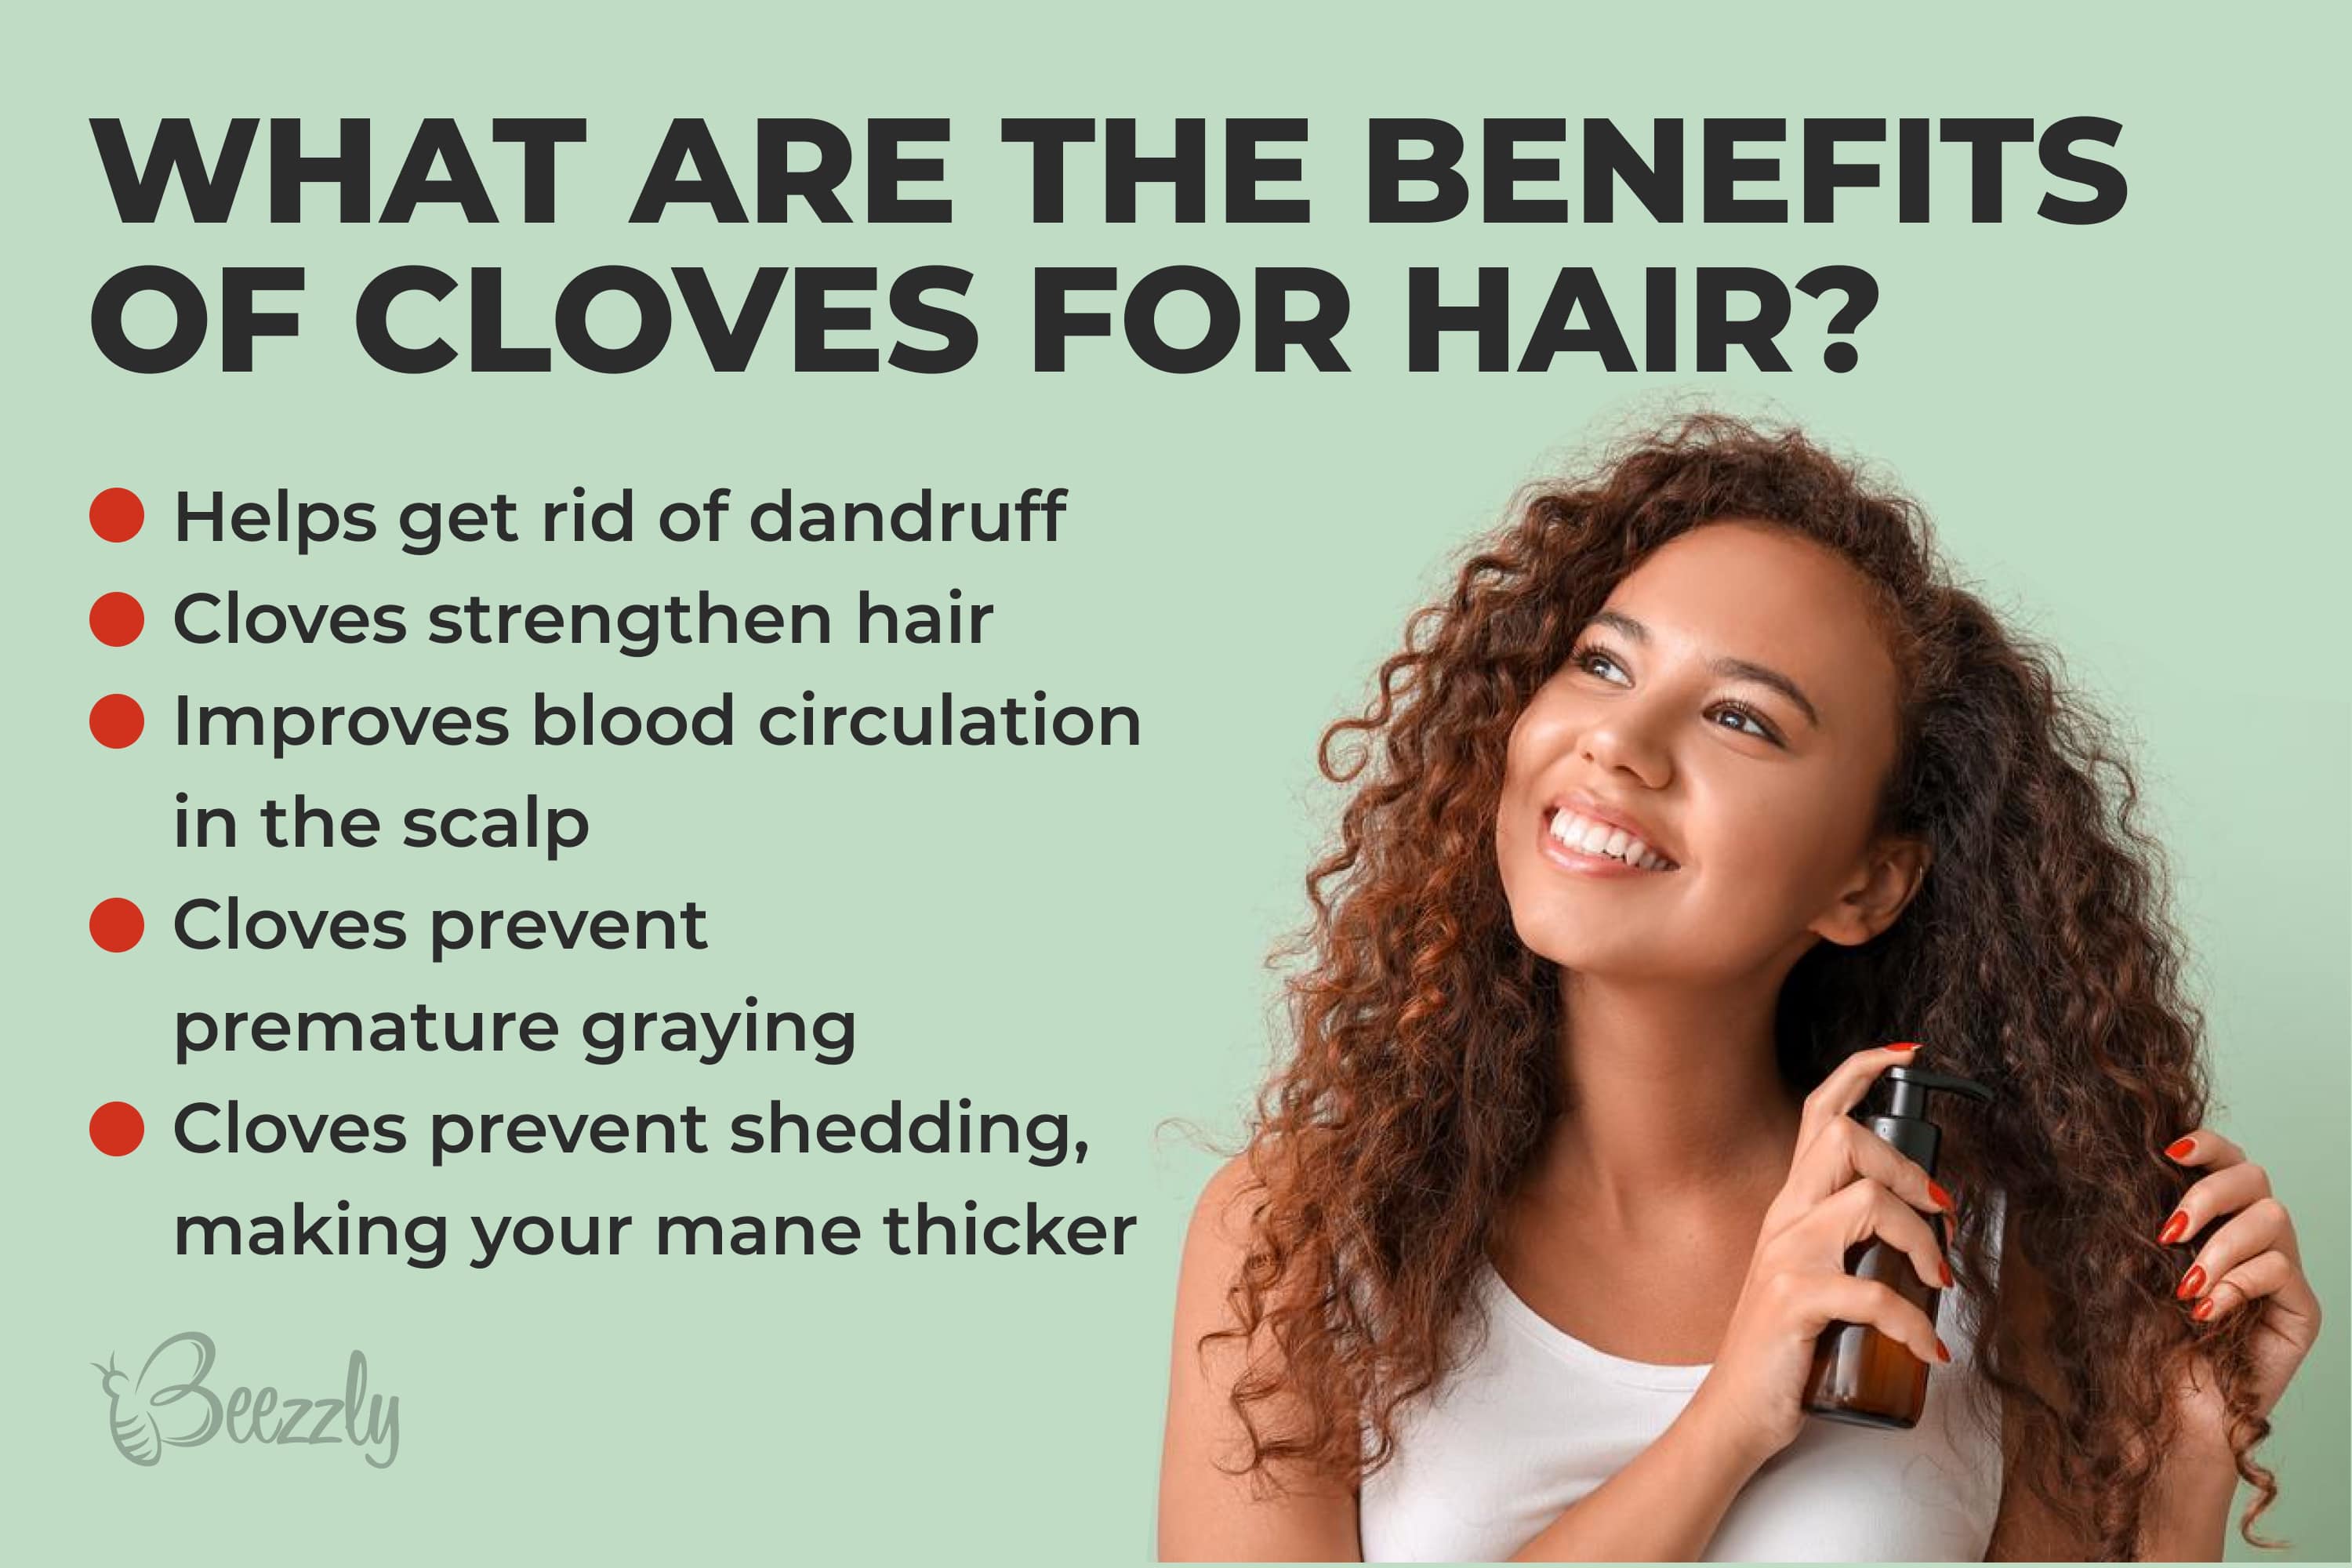 What are the benefits of cloves for hair